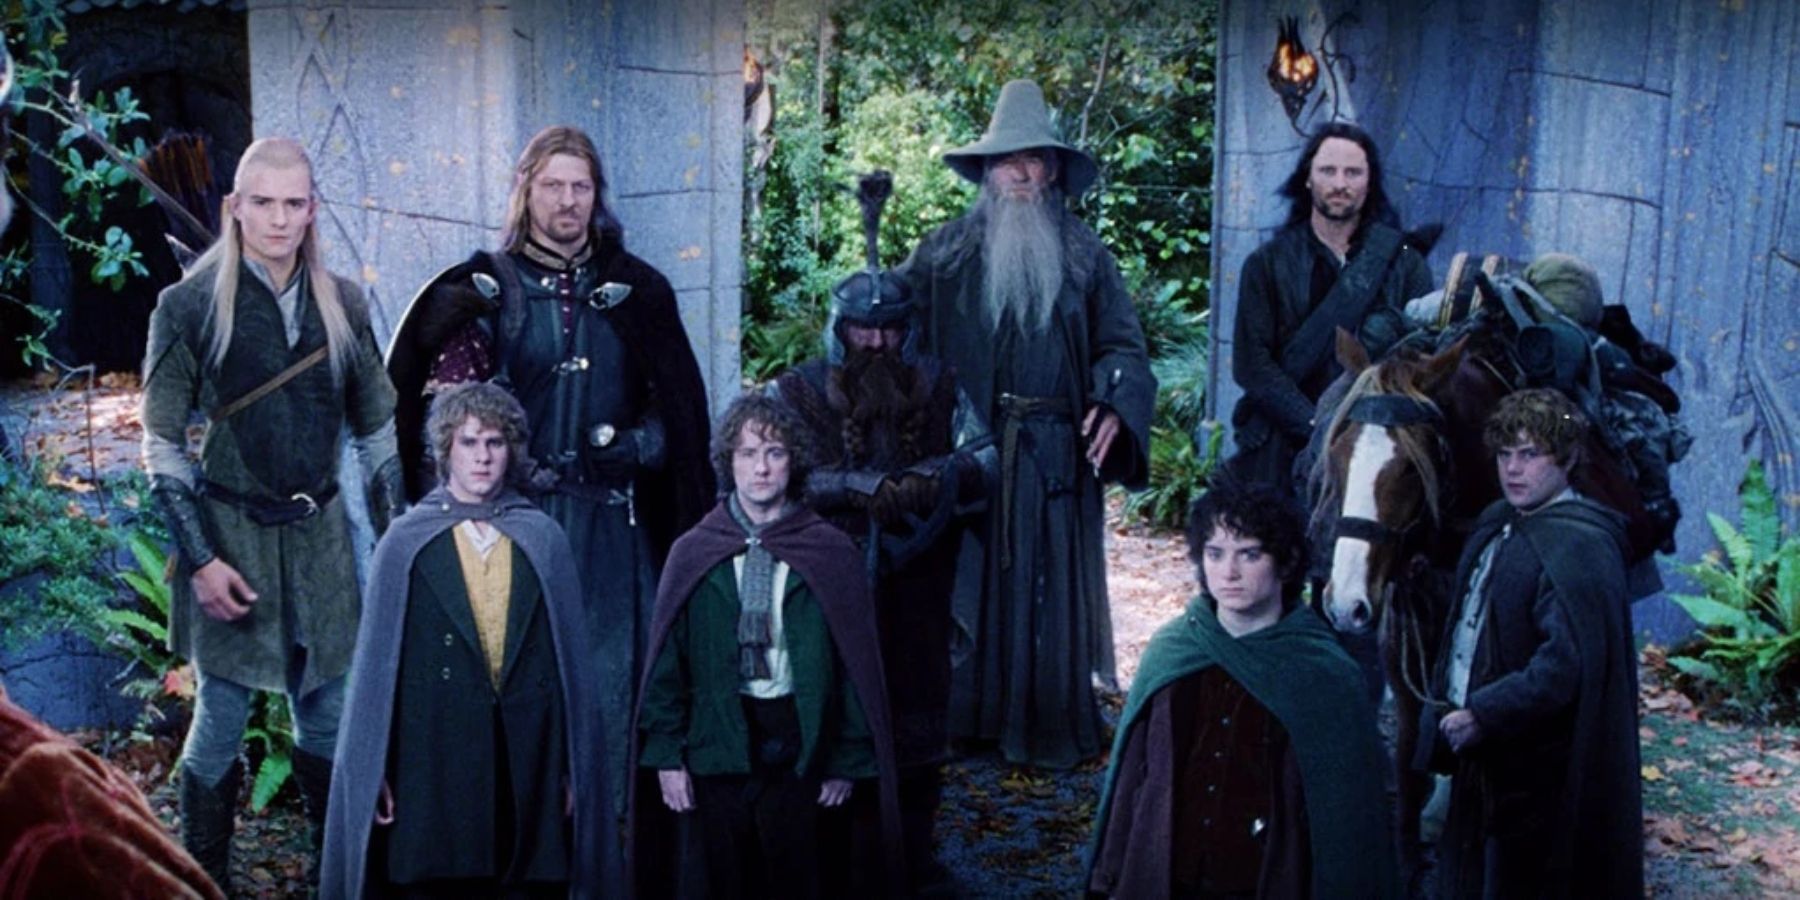 LOTR_Fellowship_Beings Of Middle Earth